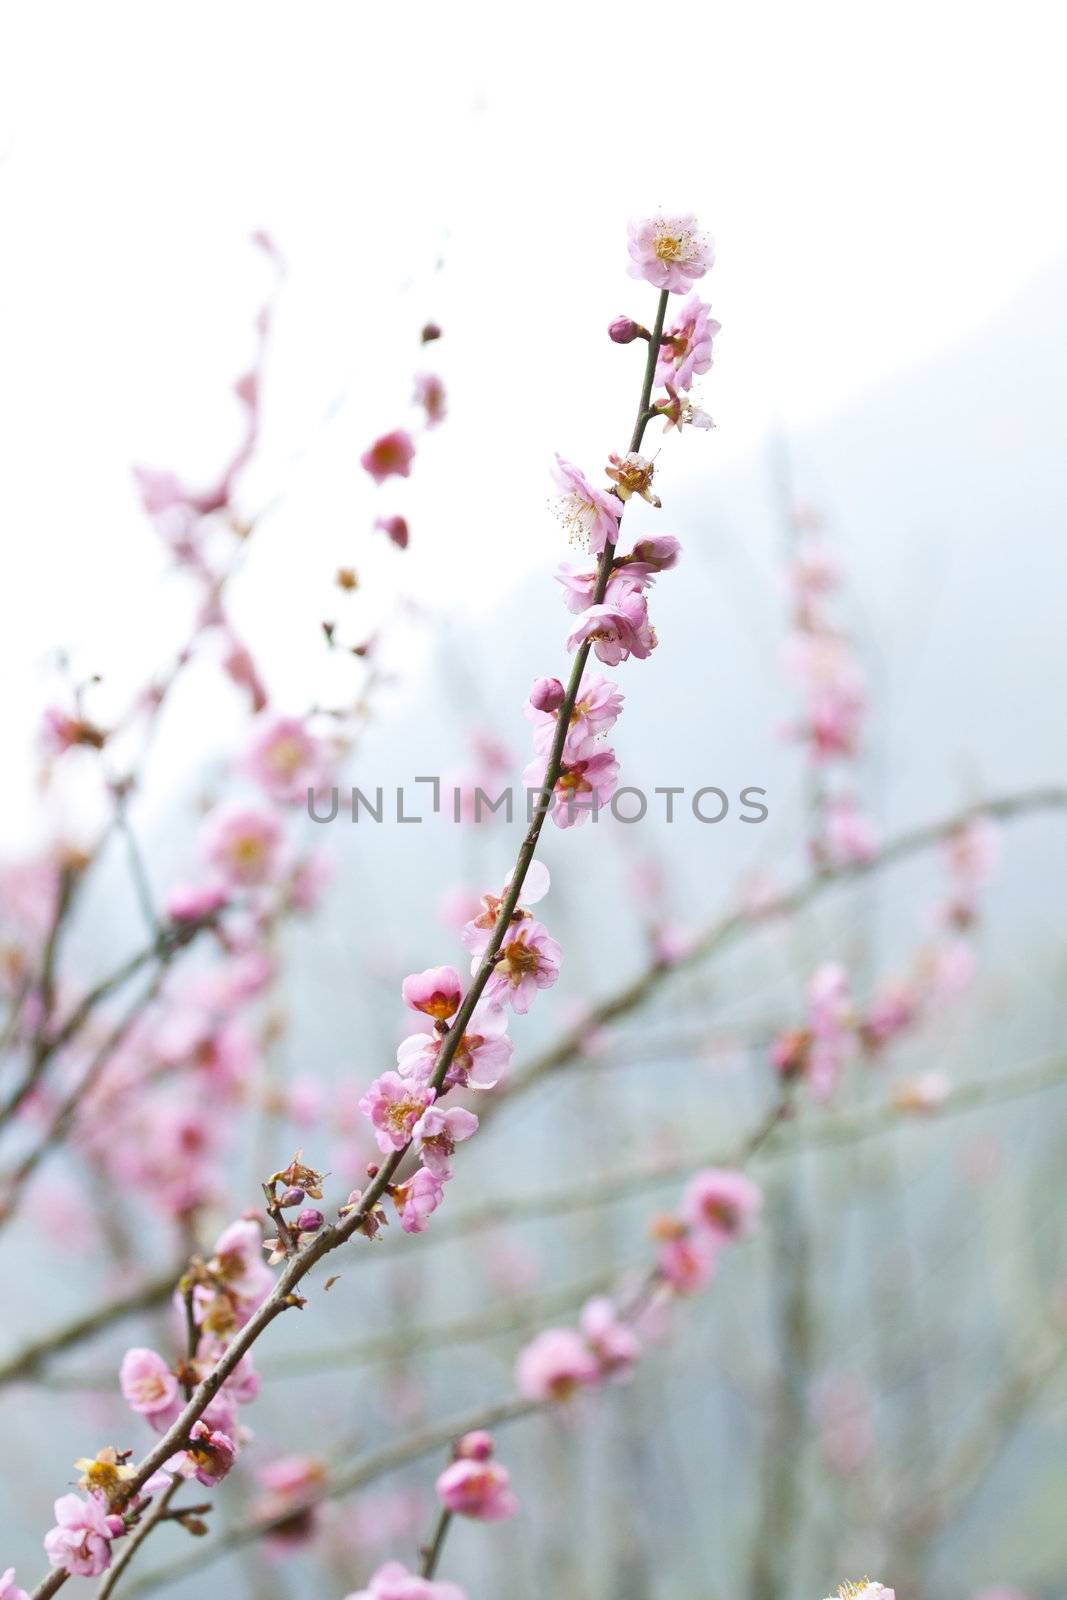 Plum blossoms in spring by kawing921